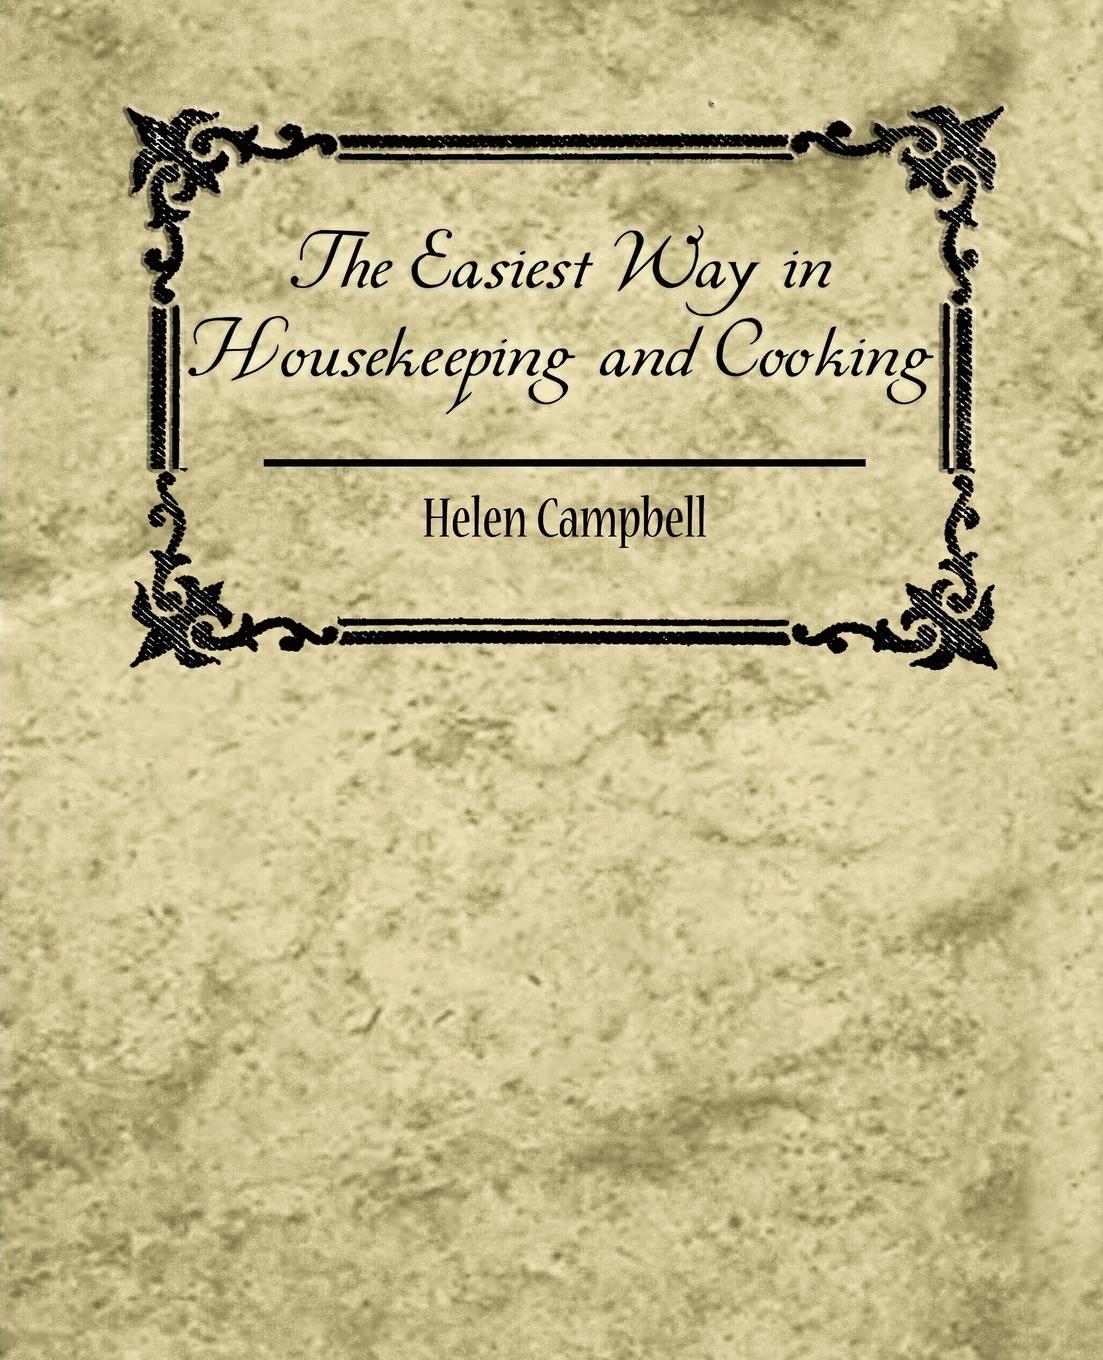 The Easiest Way in Housekeeping and Cooking - Helen Campbell, Campbell|Helen Campbell